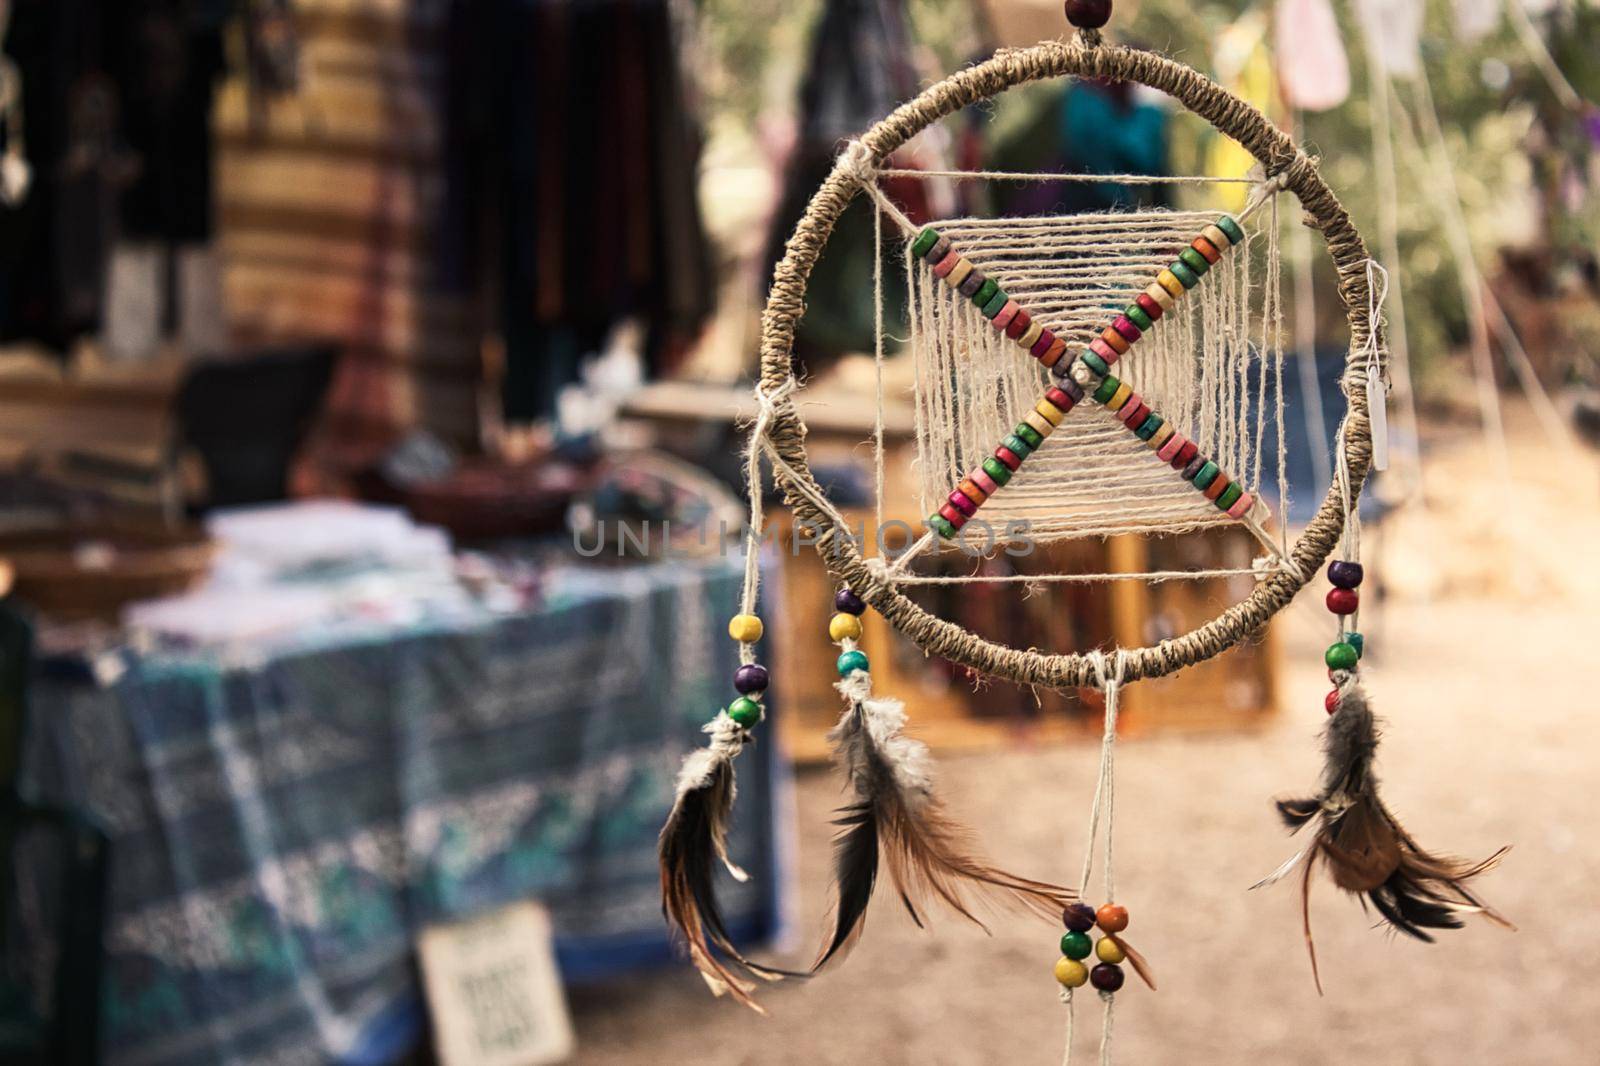 Dream catcher hanging from a tree at a bohemian festival artisan market by tennesseewitney